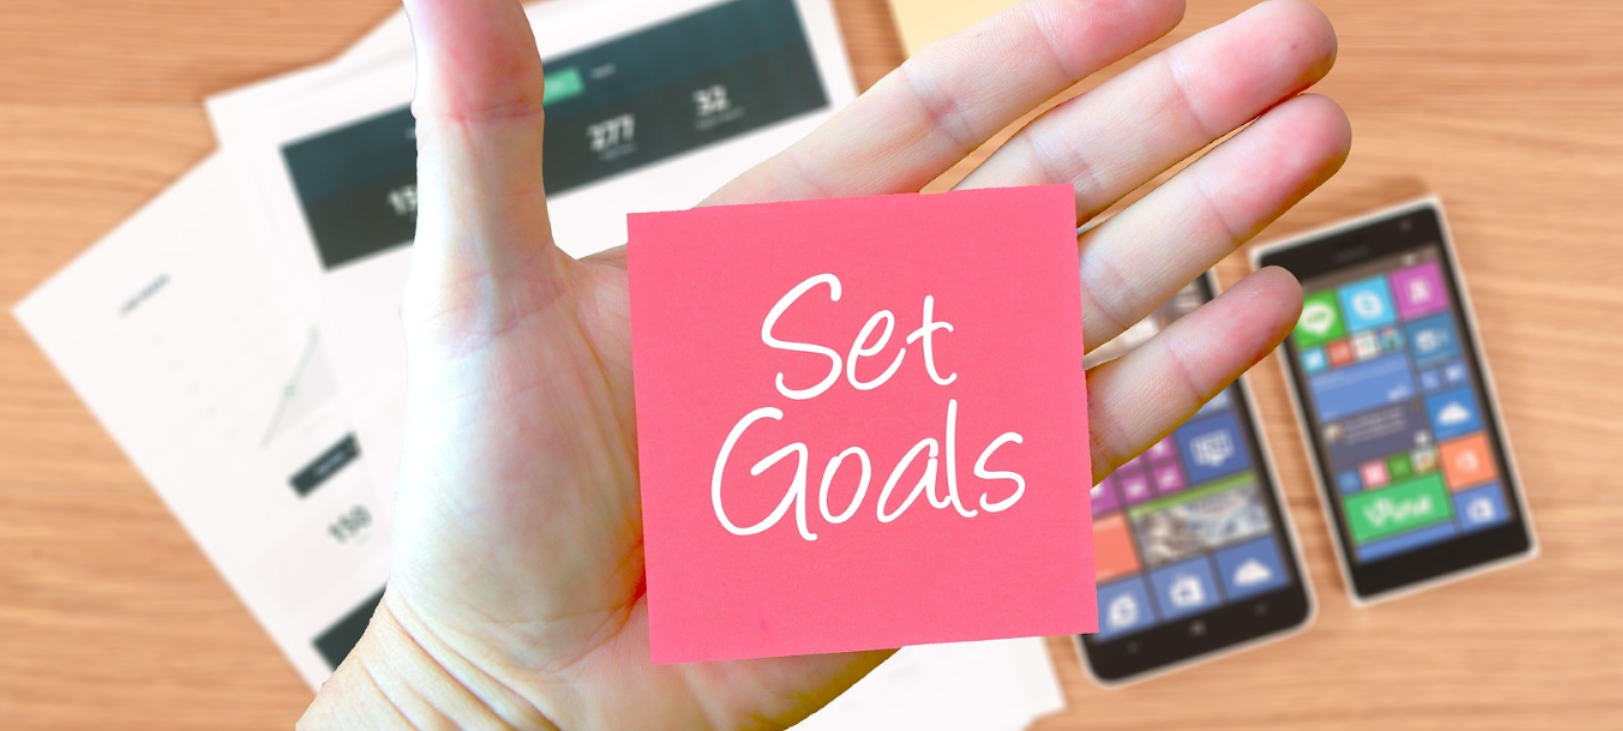 How to set goals at work